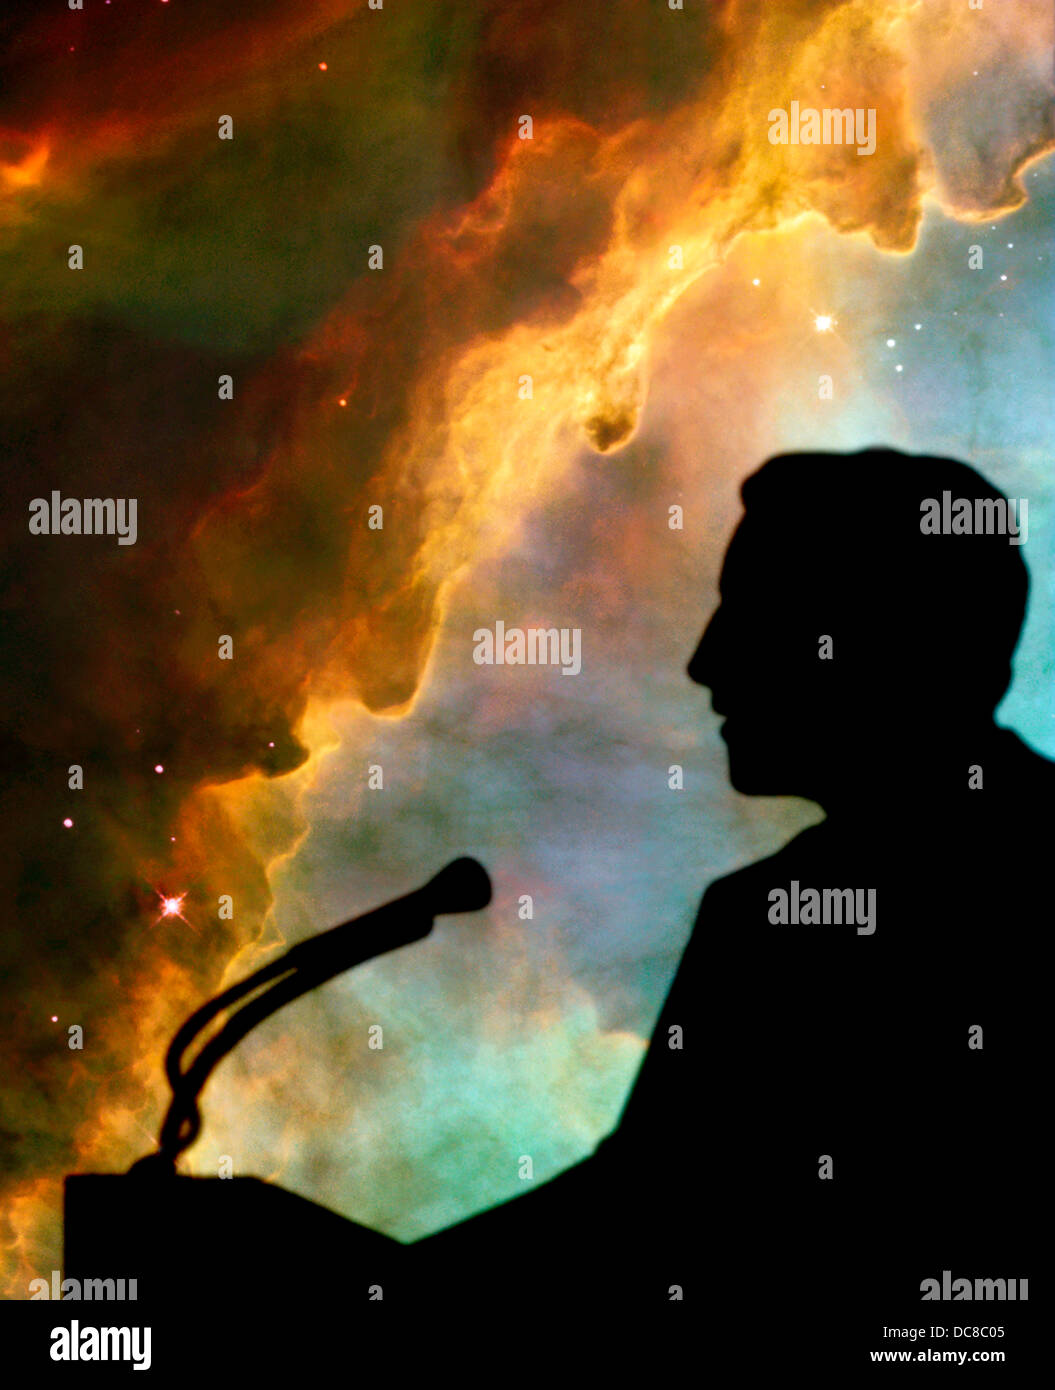 NASA Hubble view of Omega/Swan Nebula galaxy with computer generated image of man speaking on podium Stock Photo